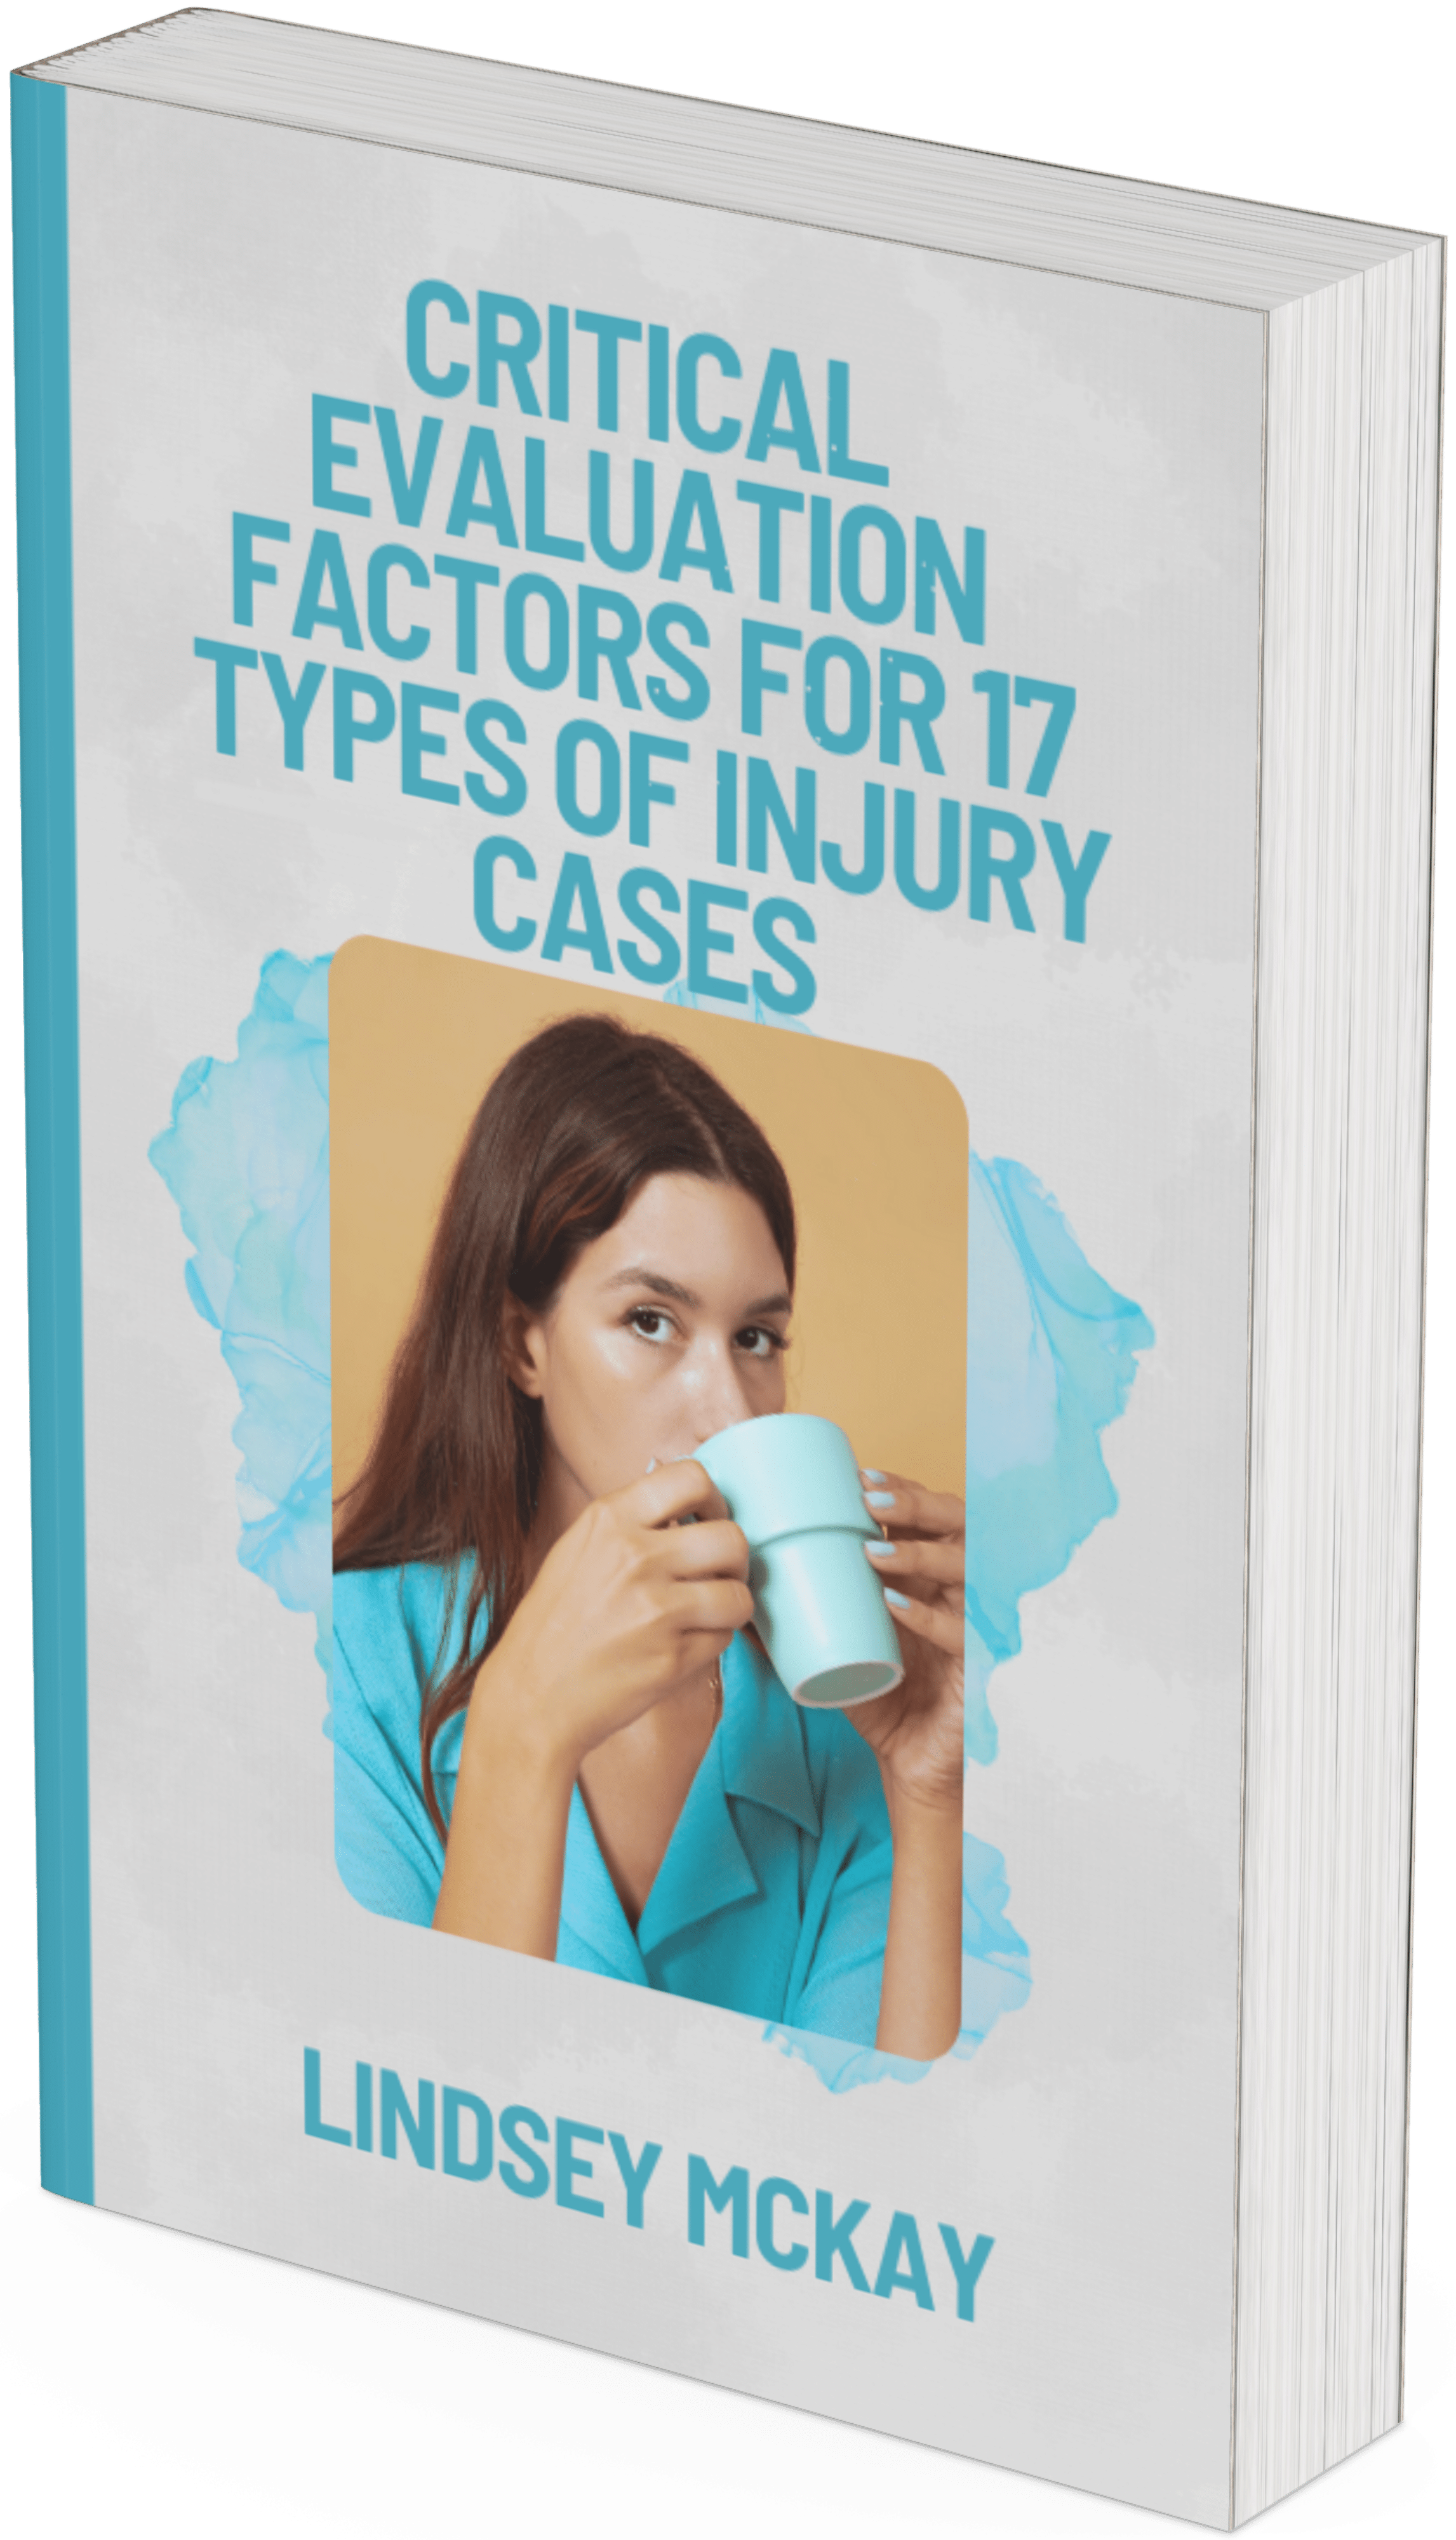 Critical Evaluation Factors for 17 Types of Injury Cases​